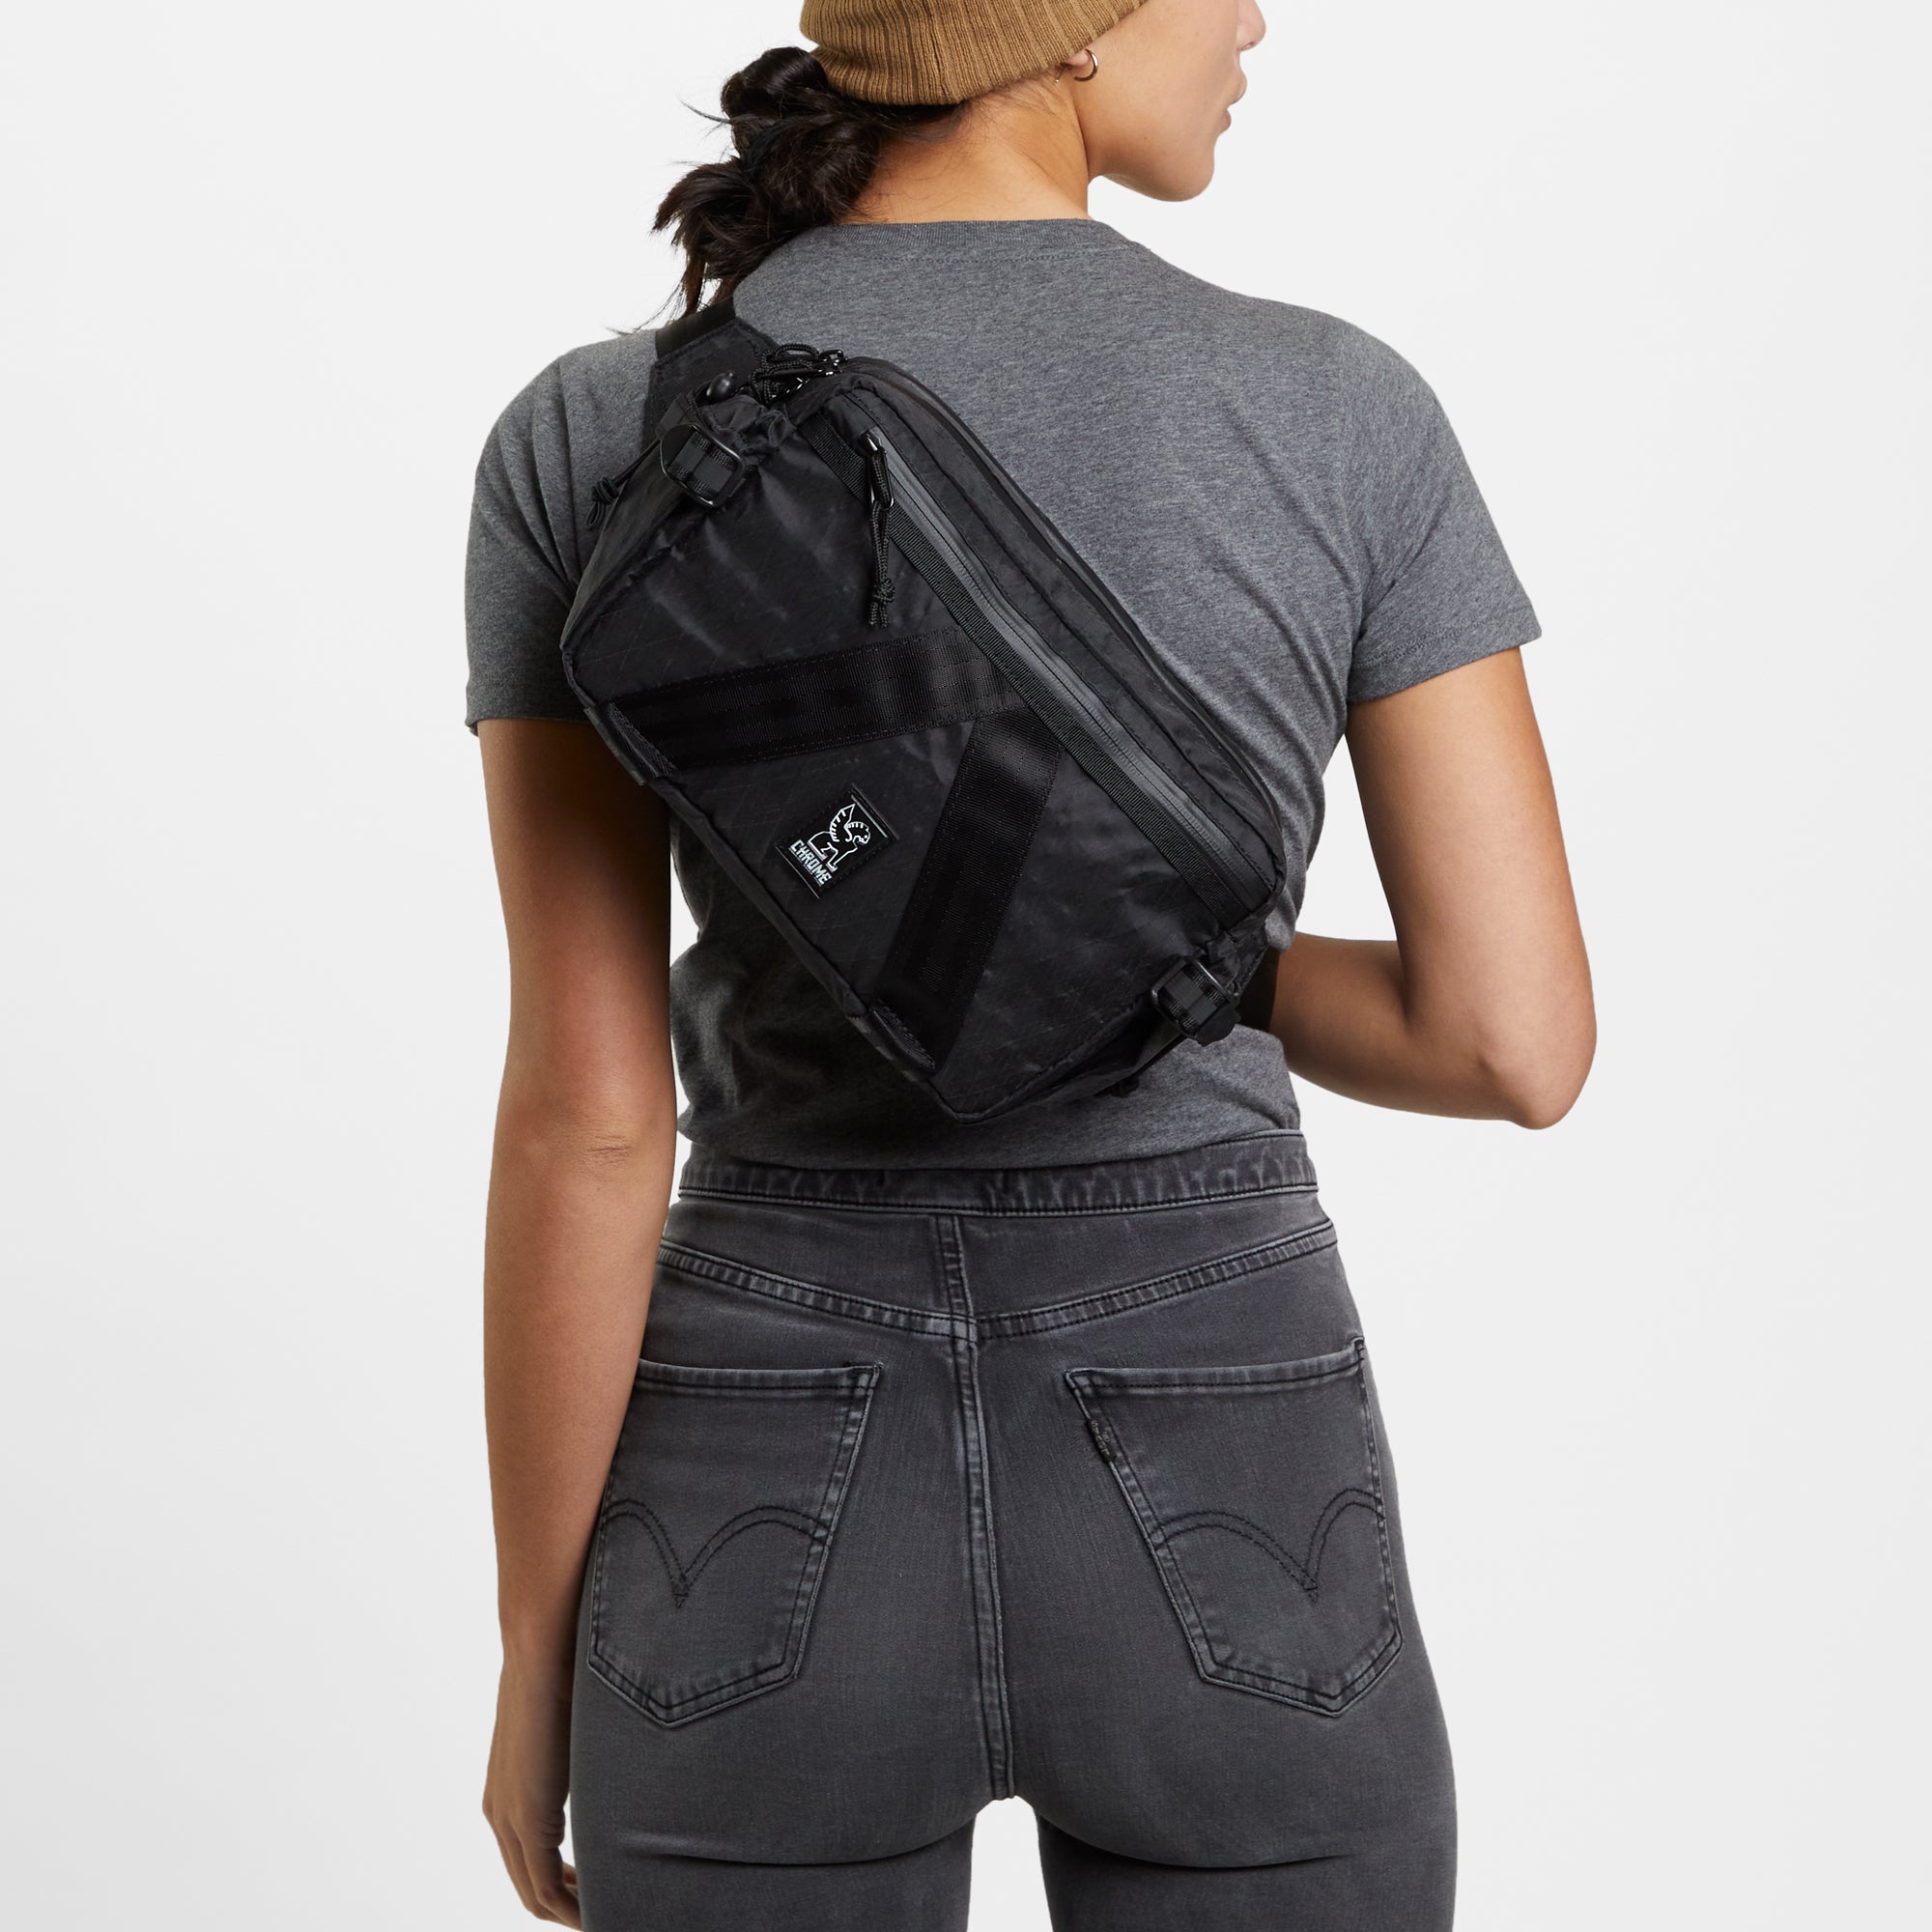 Tensile Hip Pack on a woman back view